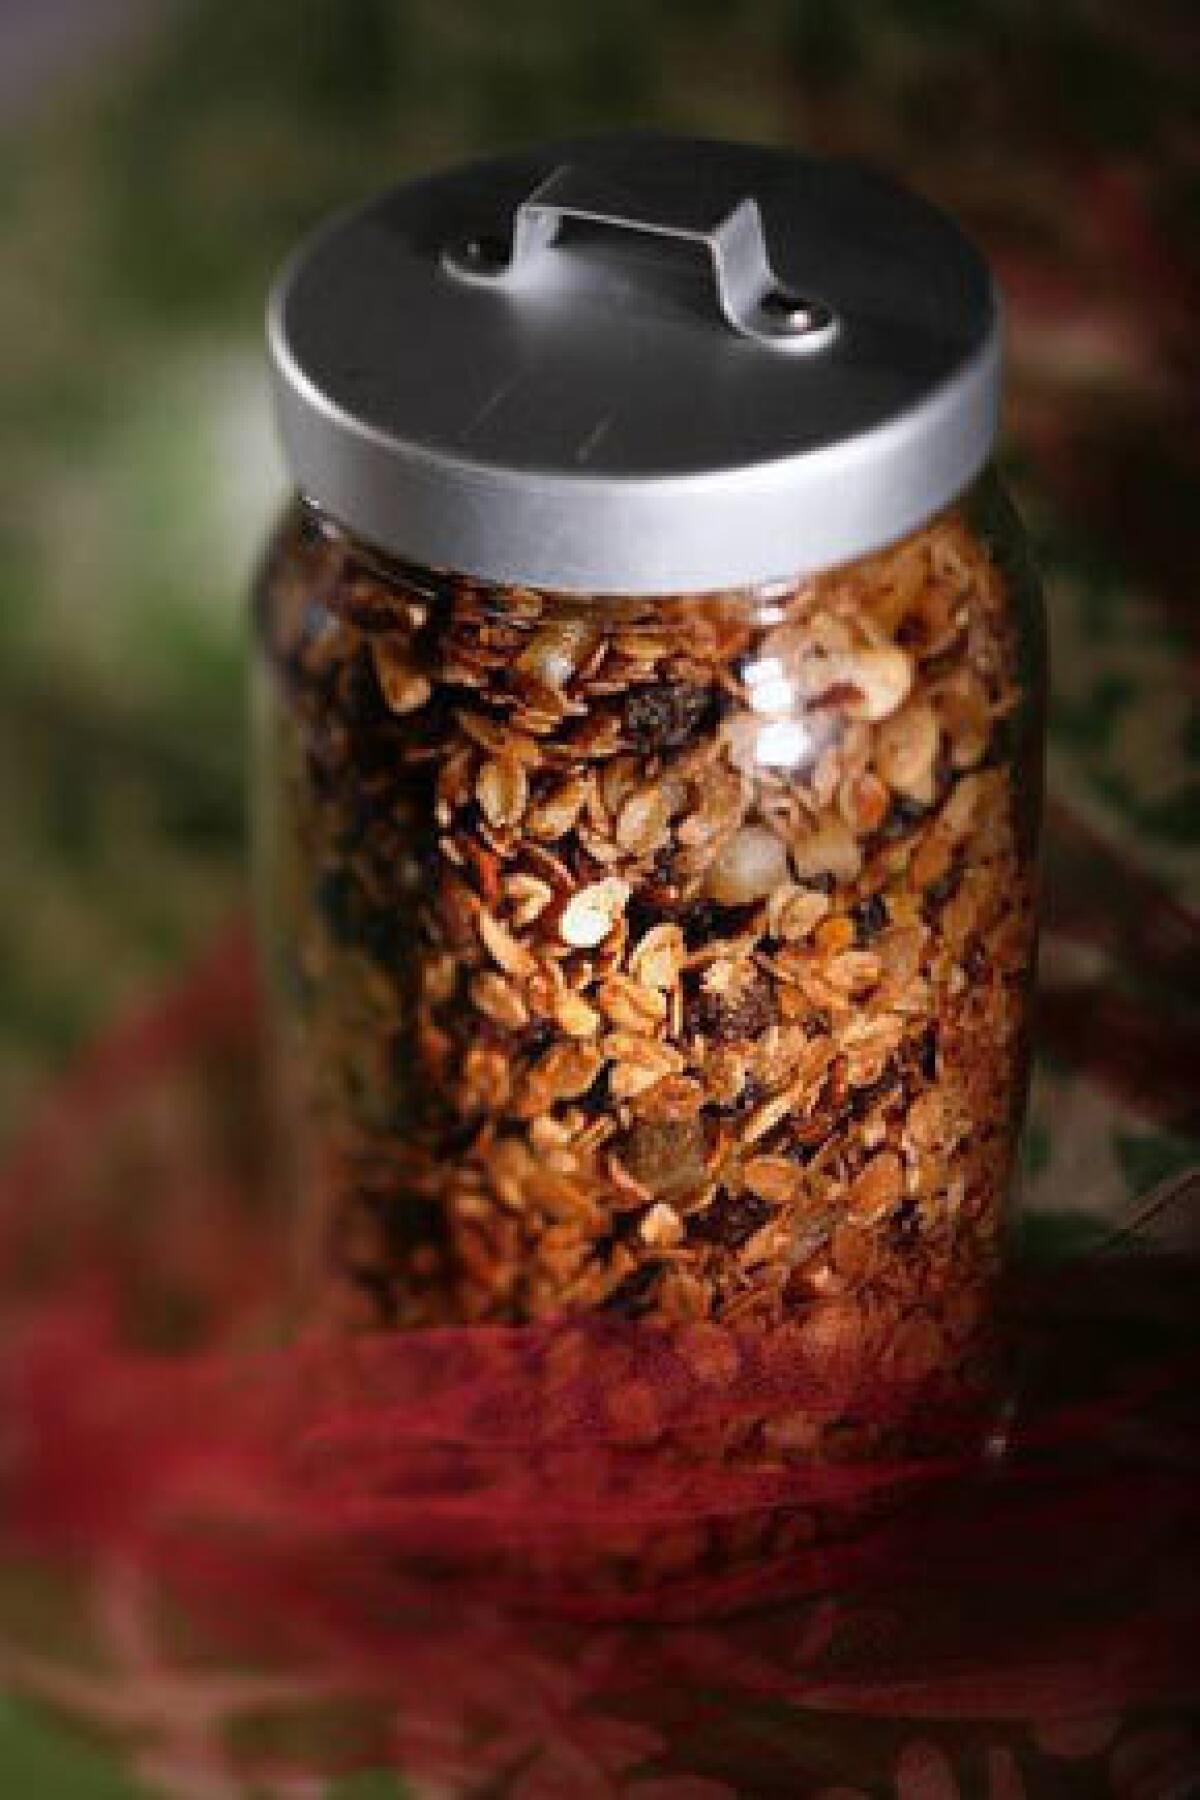 Homemade granola can be packaged for a holiday gift.